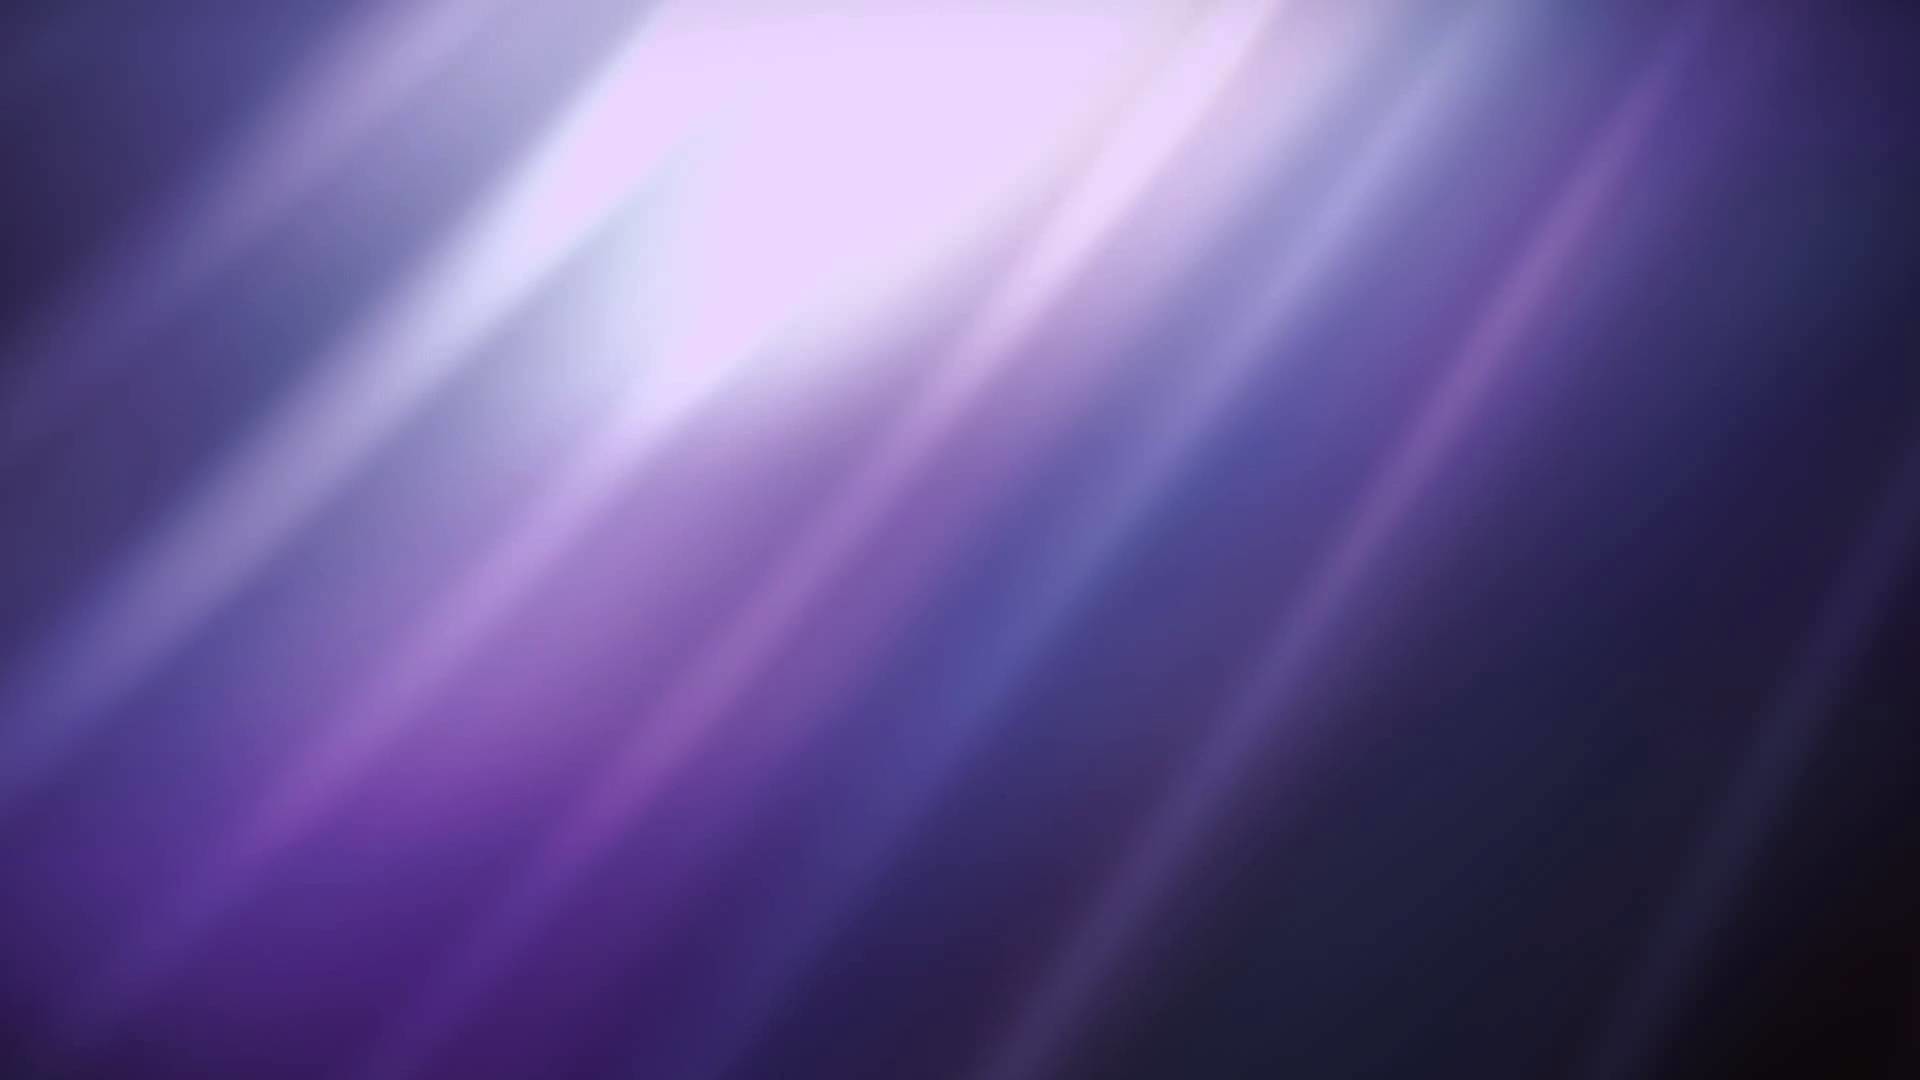 1920x1080  Free Stock Video Download - Abstract Fractal Purple and Blue  Background Loop - YouTube